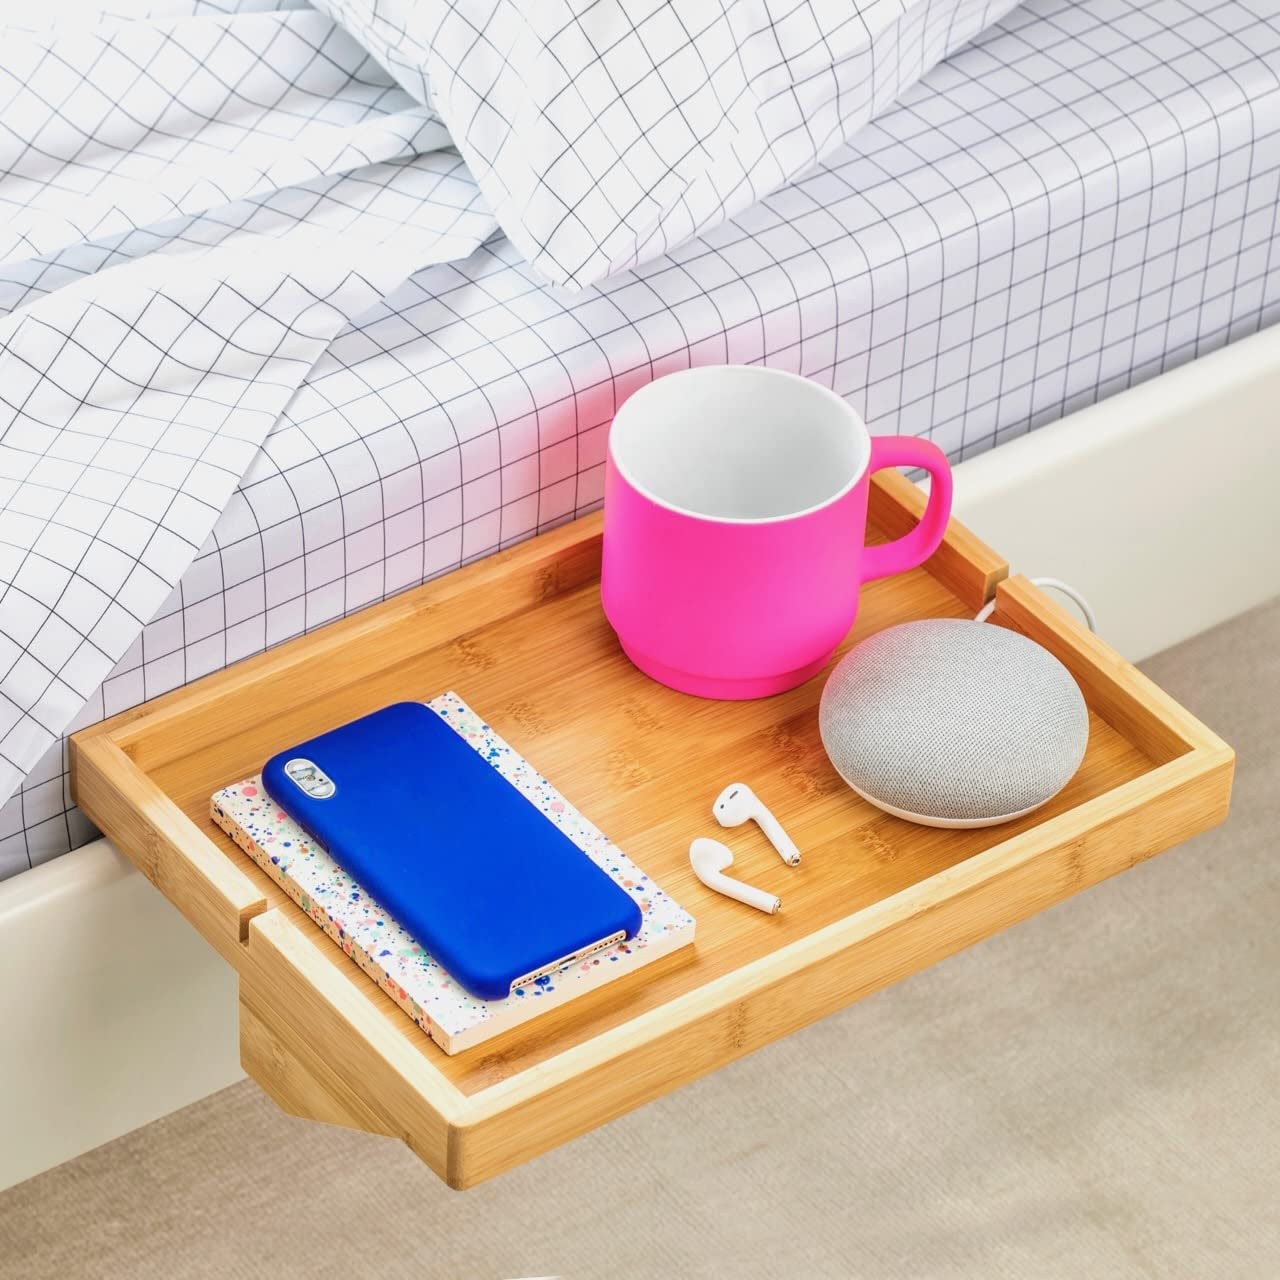 Light wood shelf attached to a bed frame holding accessories and a phone 